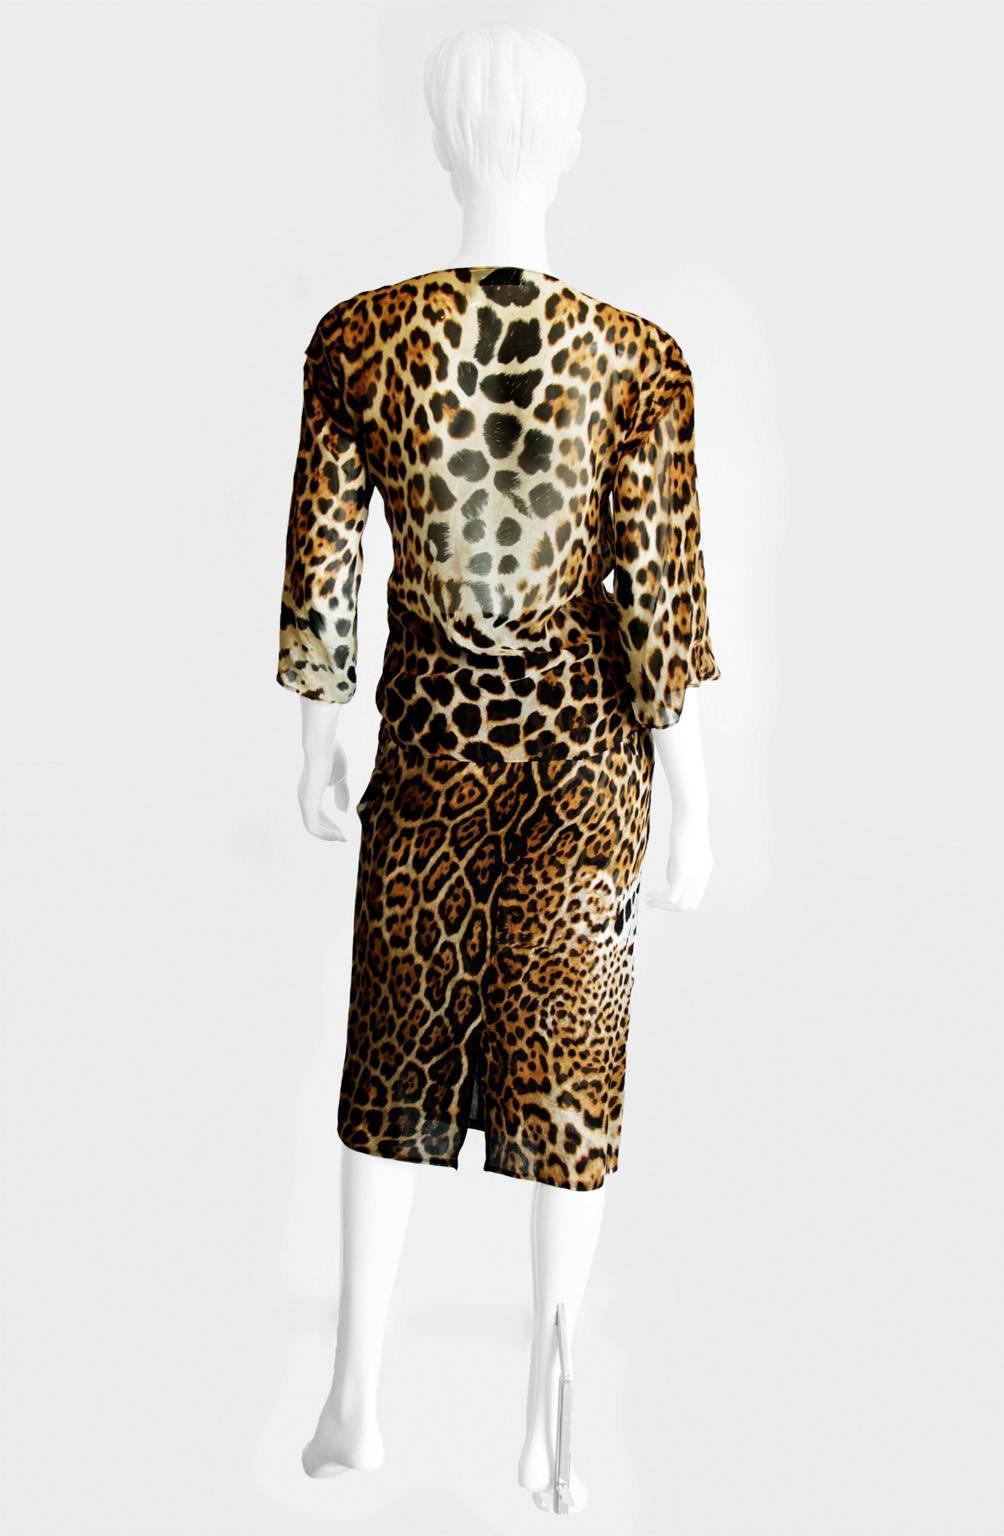 Black Gorgeous Tom Ford For YSL Rive Gauche SS 2002 Safari Collection Silk Skirt Suit!